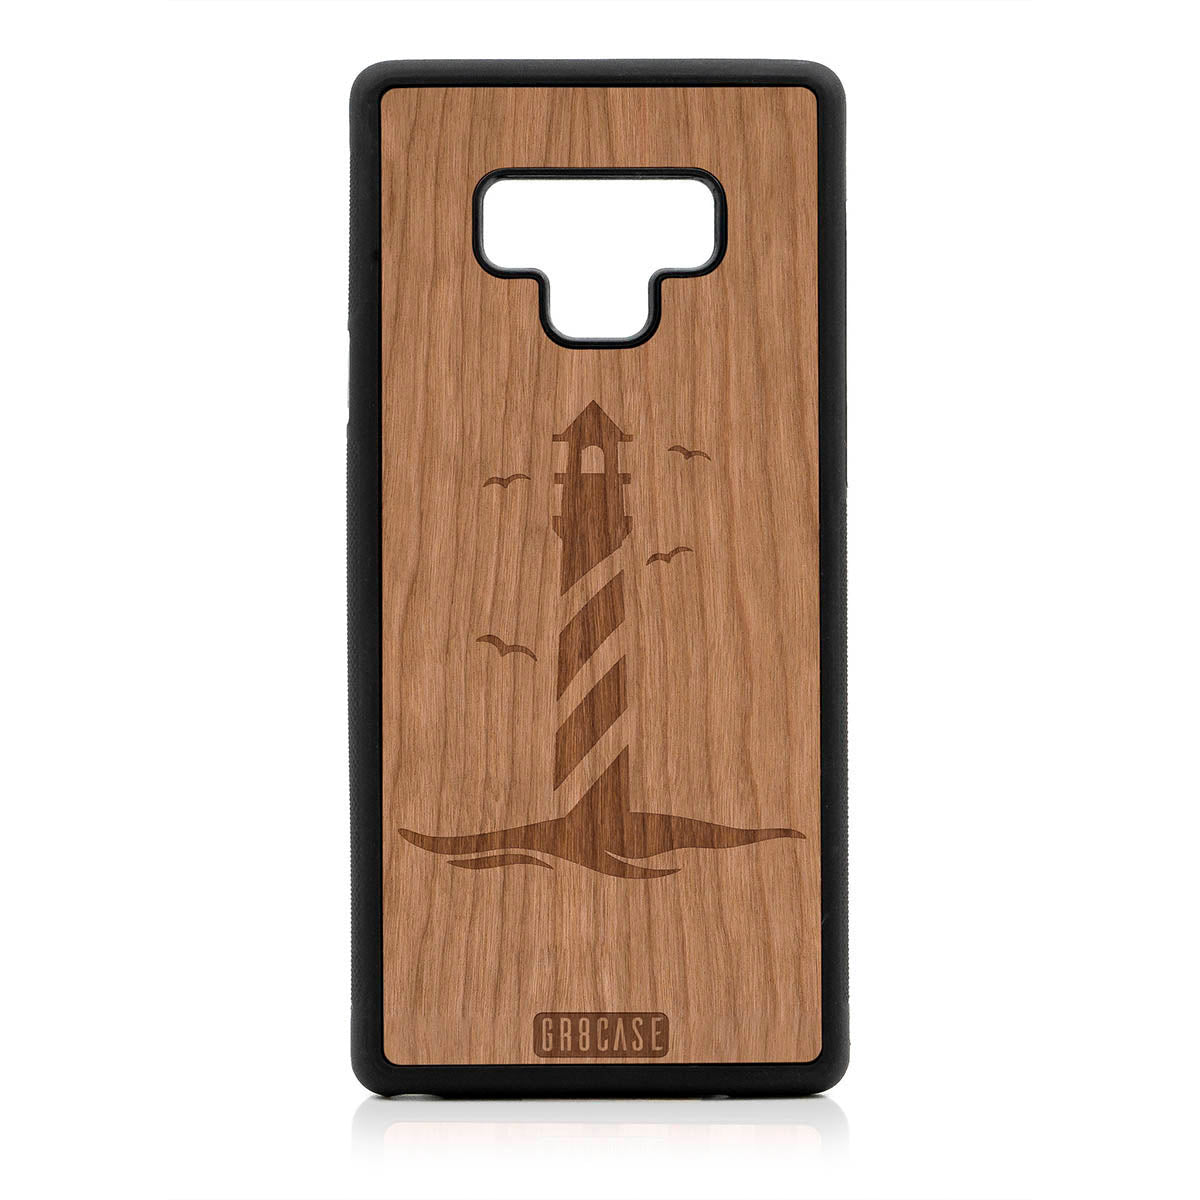 Lighthouse Design Wood Case For Samsung Galaxy Note 9